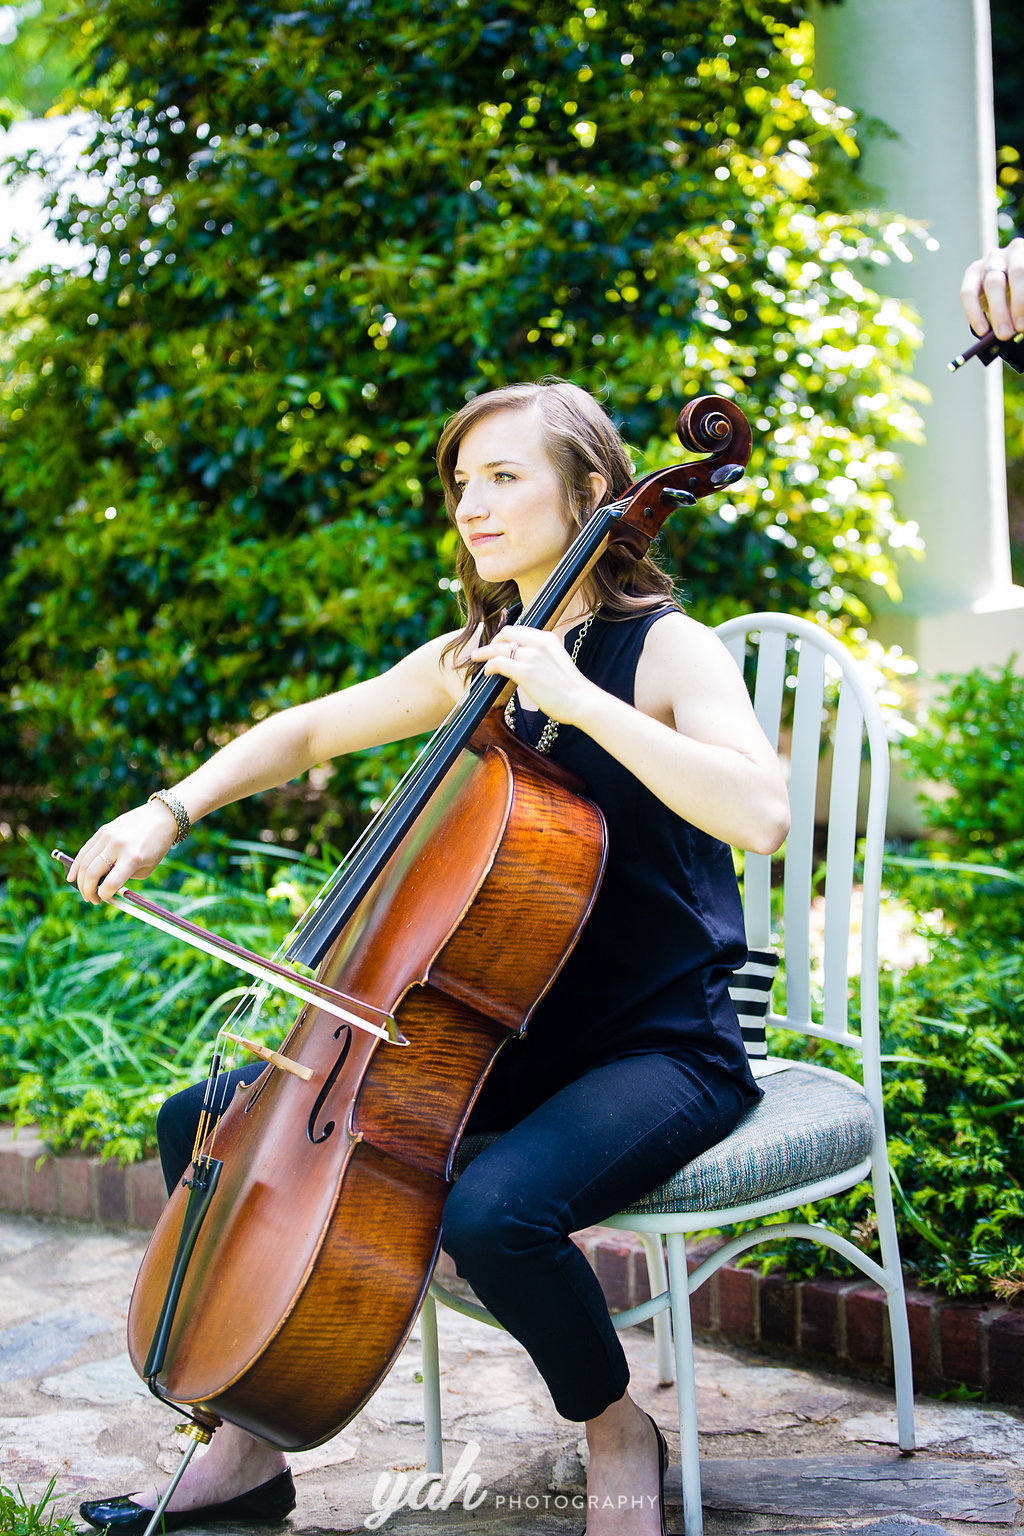 Wescottage Music, The Ivy Place, Charlotte Wedding Musicians